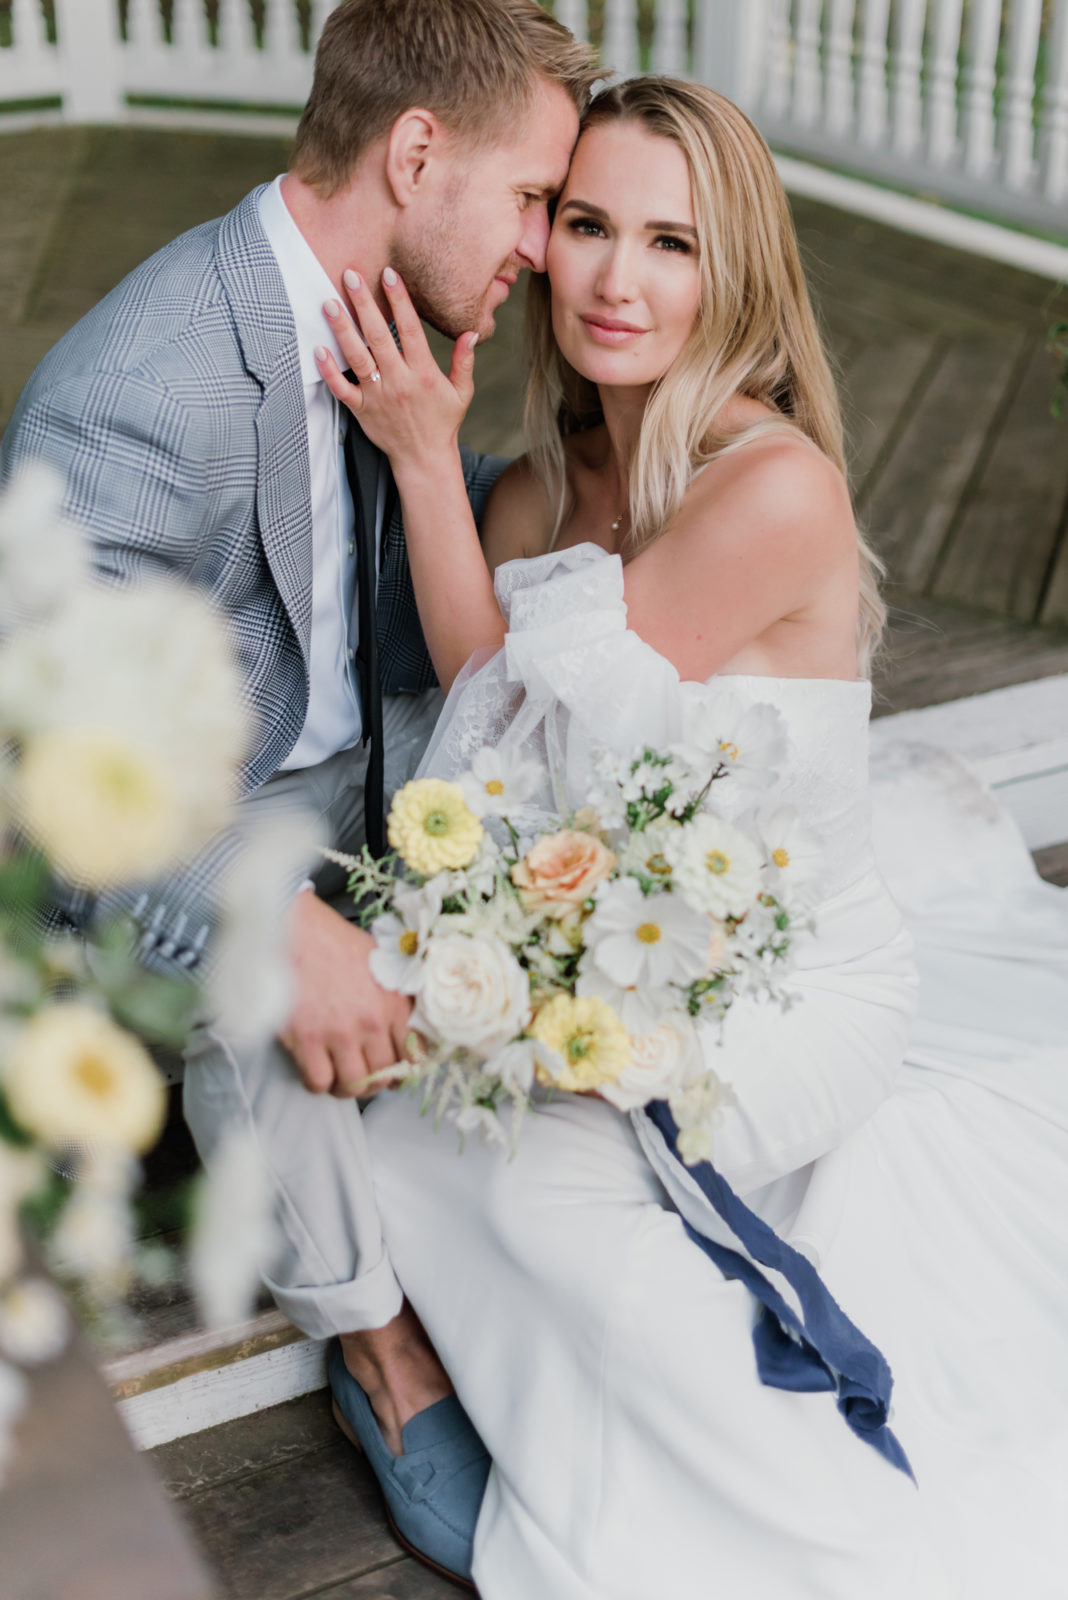 Pantone Colours of The Year In this Gorgeous Portugal-Inspired Wedding Editorial Featured by Brontë Bride, yellow and white bouquet, groom attire